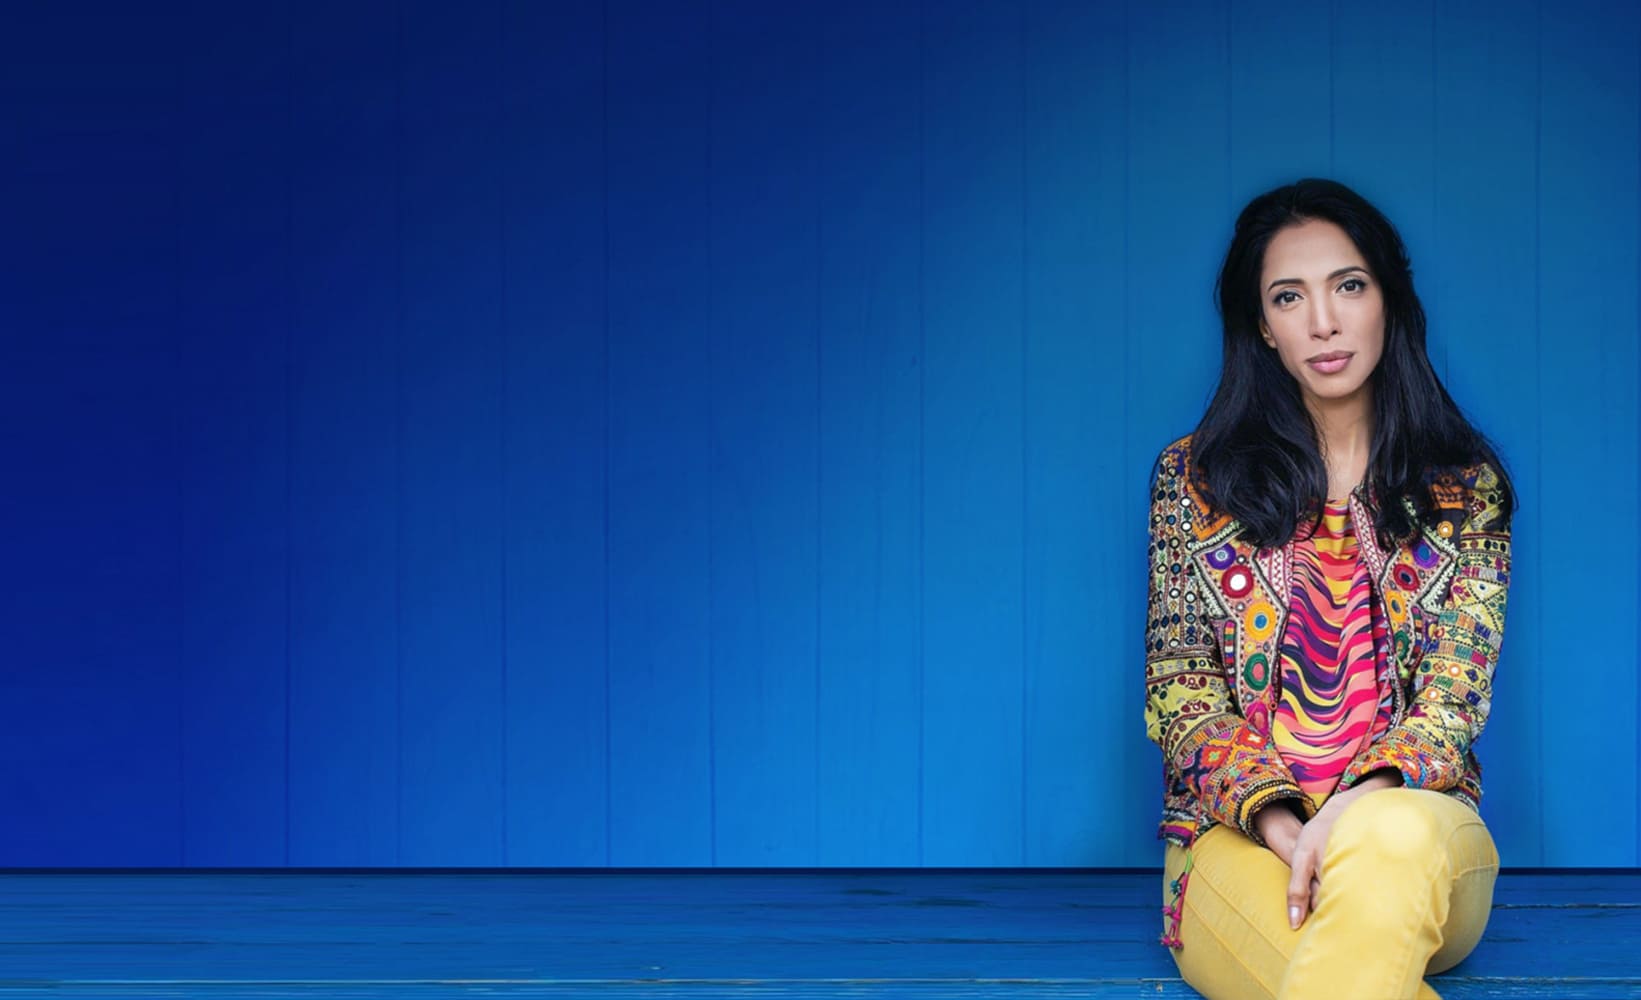 Zohre Esmaeli woman with black hair sitting in a colorful patterned jacket and yellow pants in front of a blue background